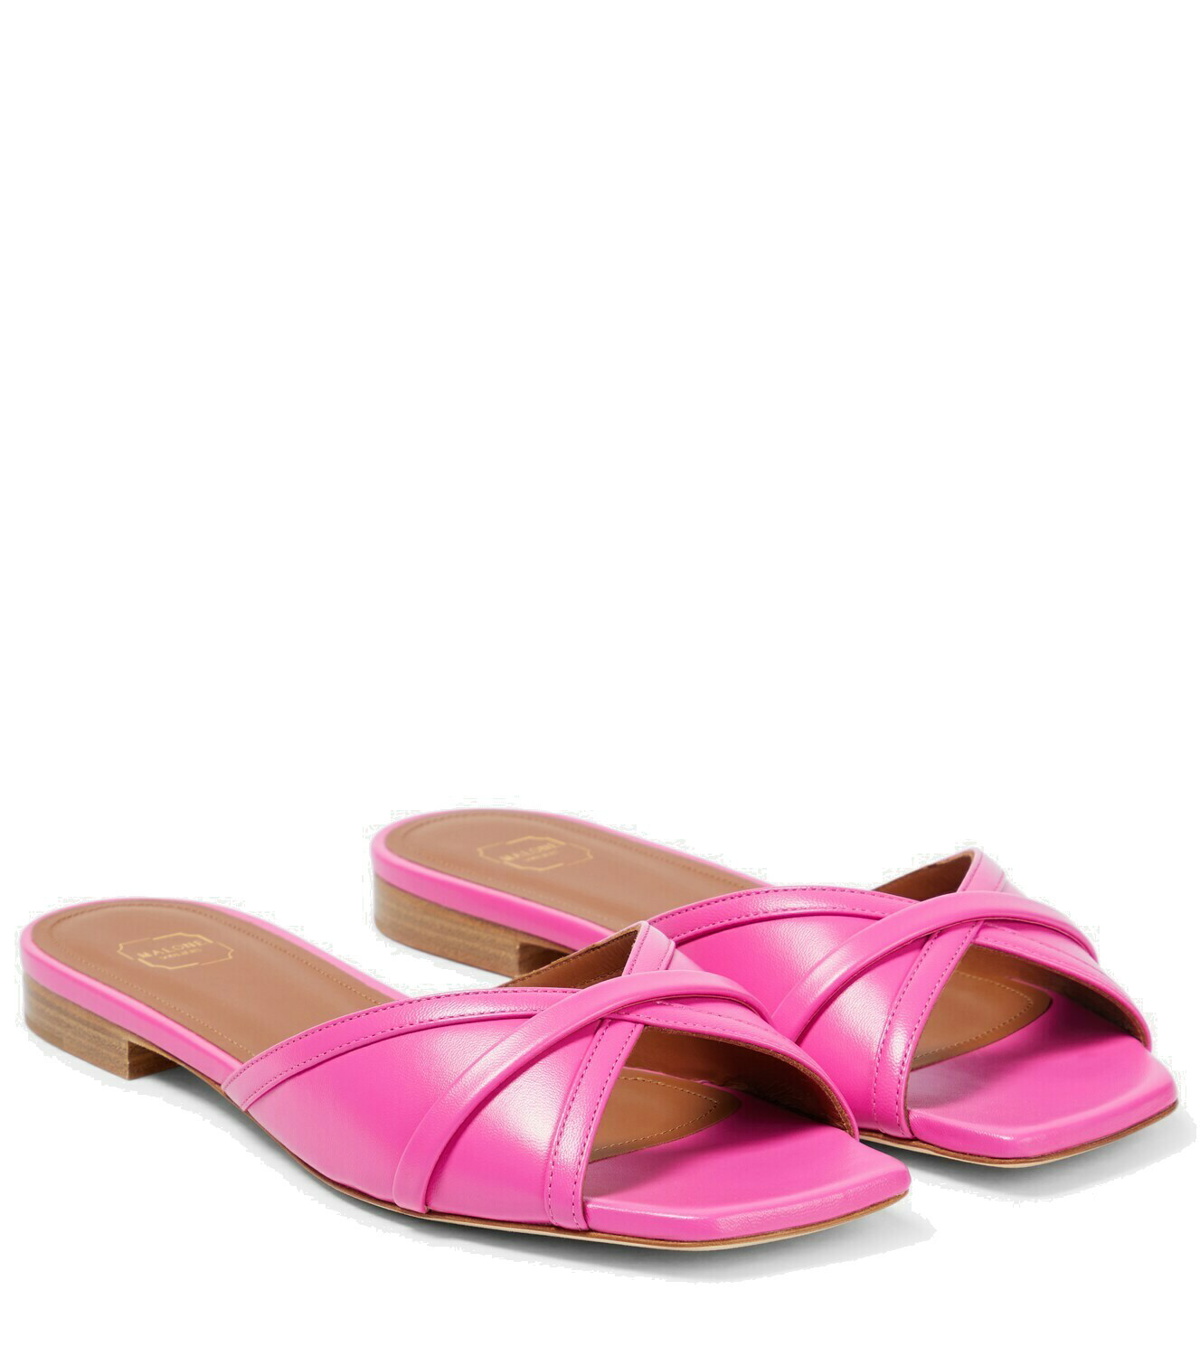 Malone Souliers Perla leather sandals Malone Souliers